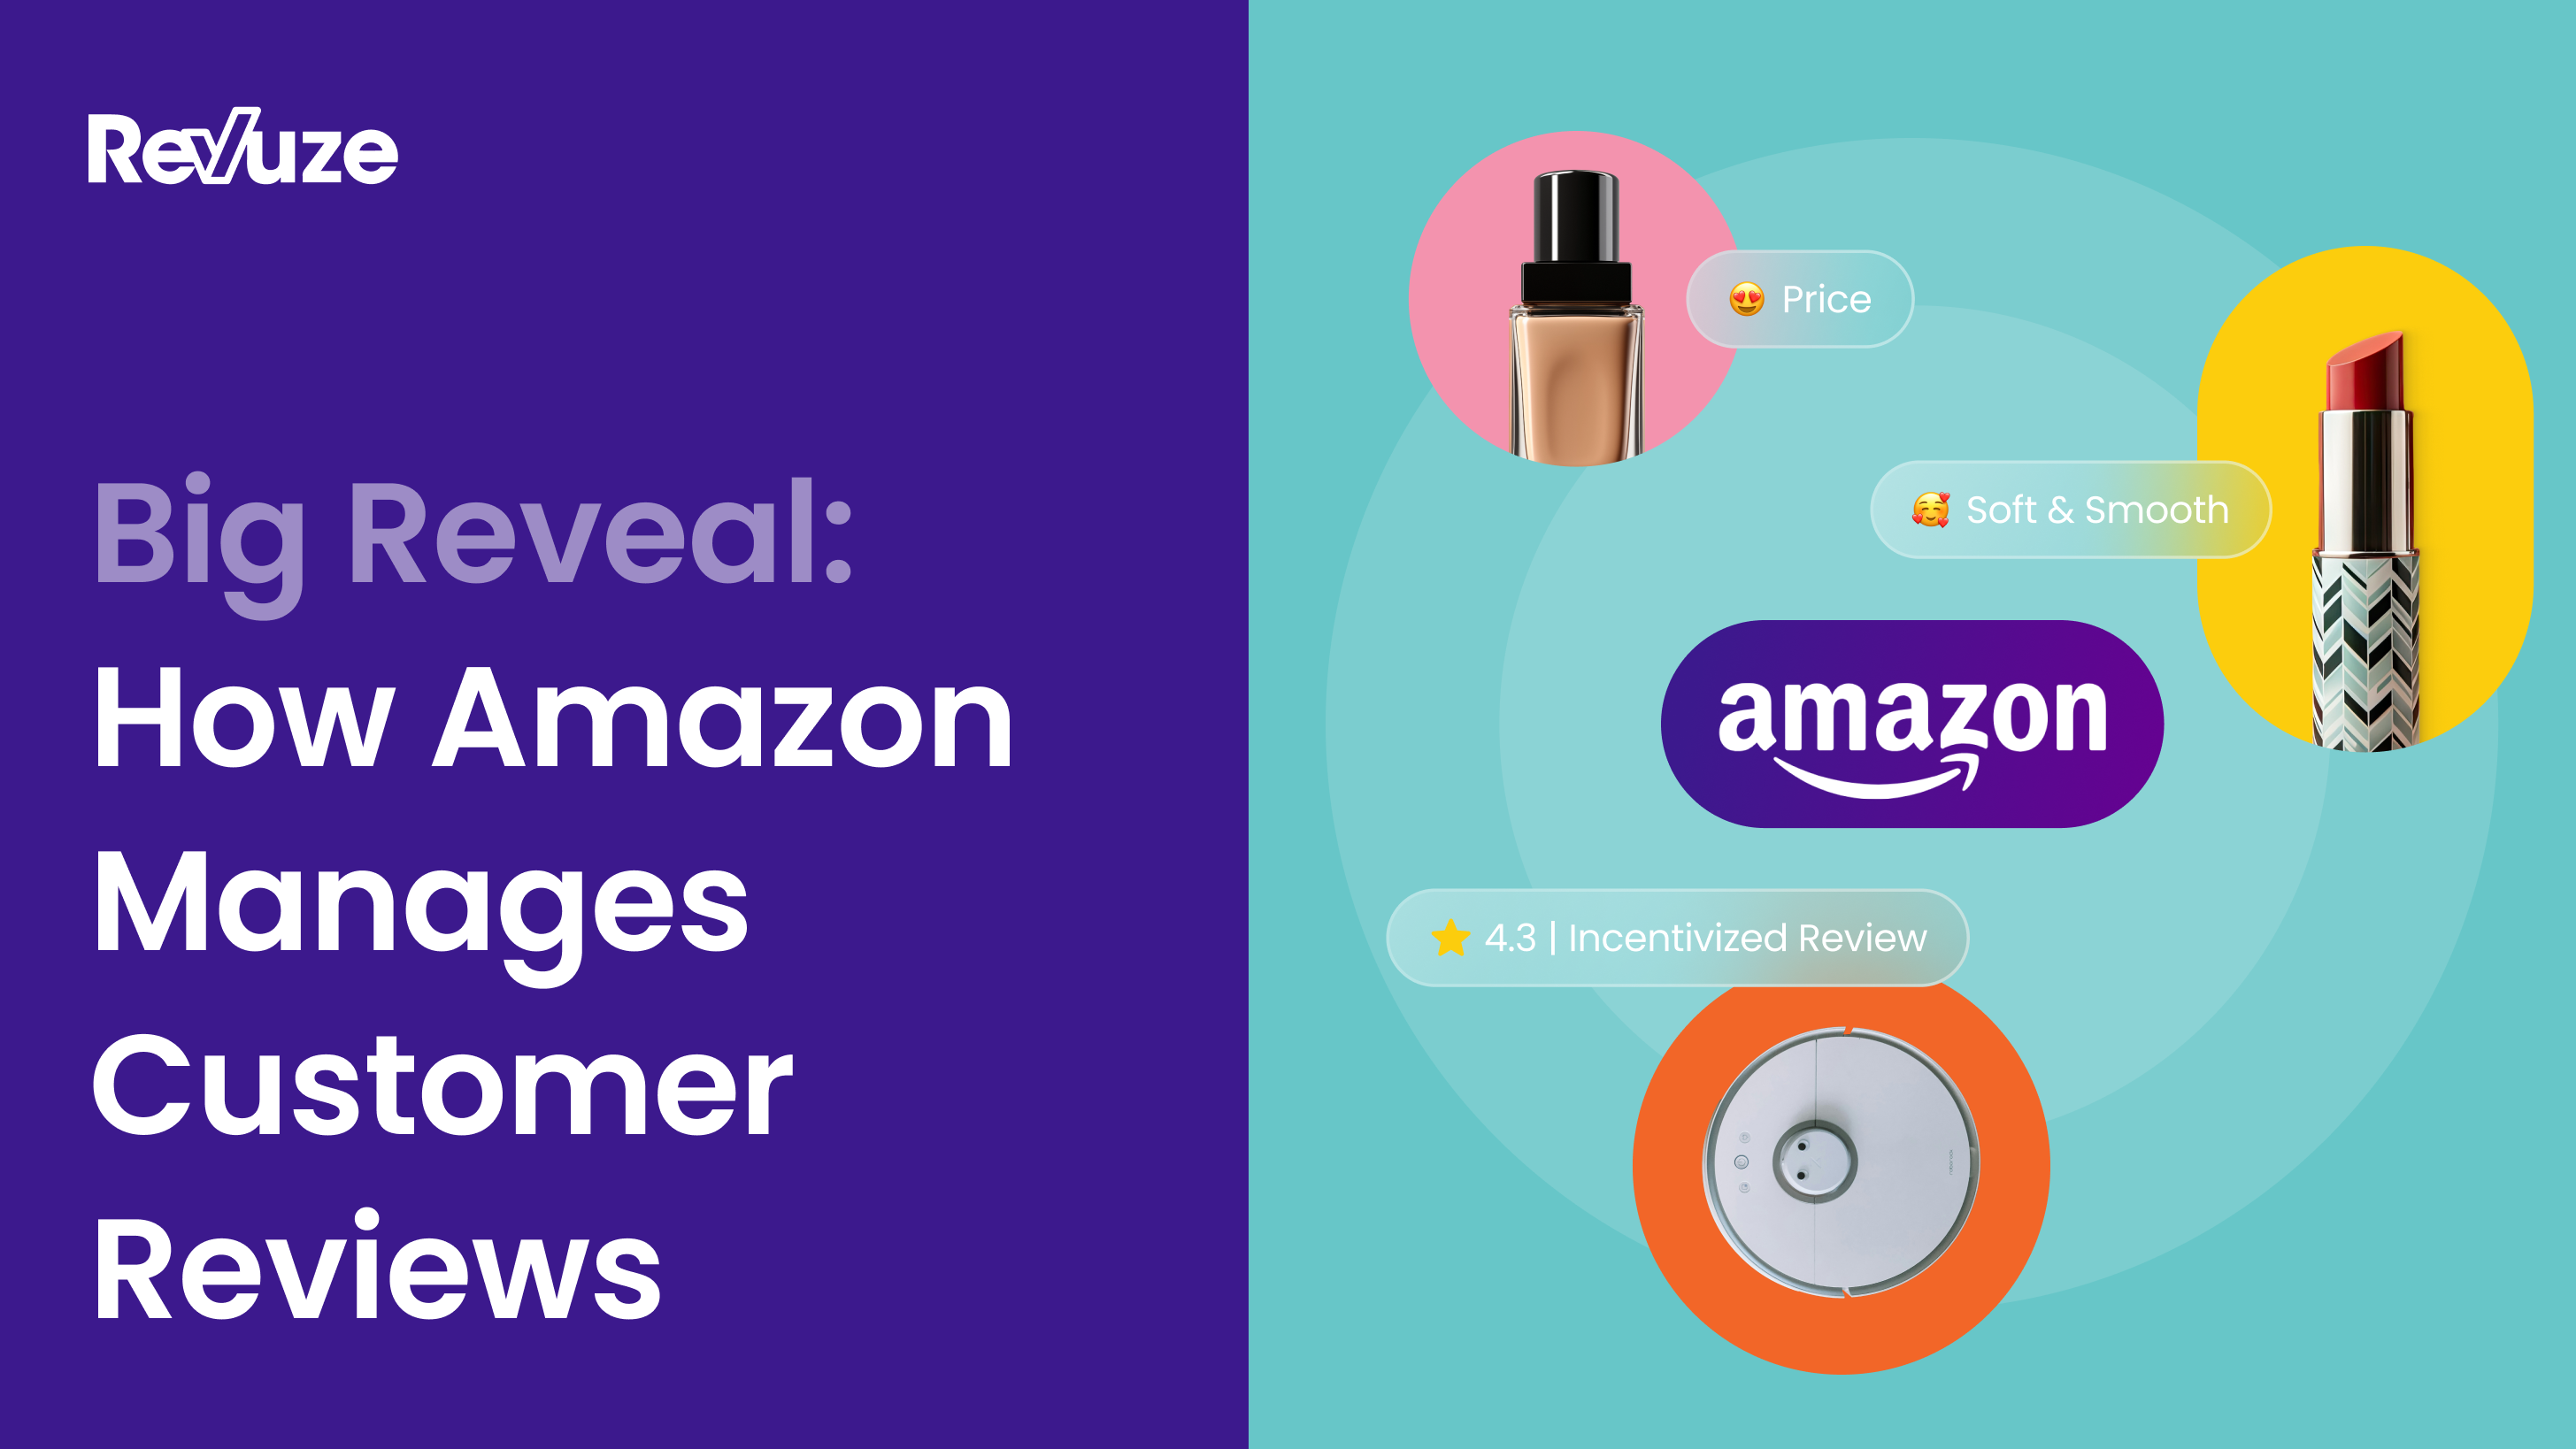 Big Reveal: How Amazon Manages Customer Reviews